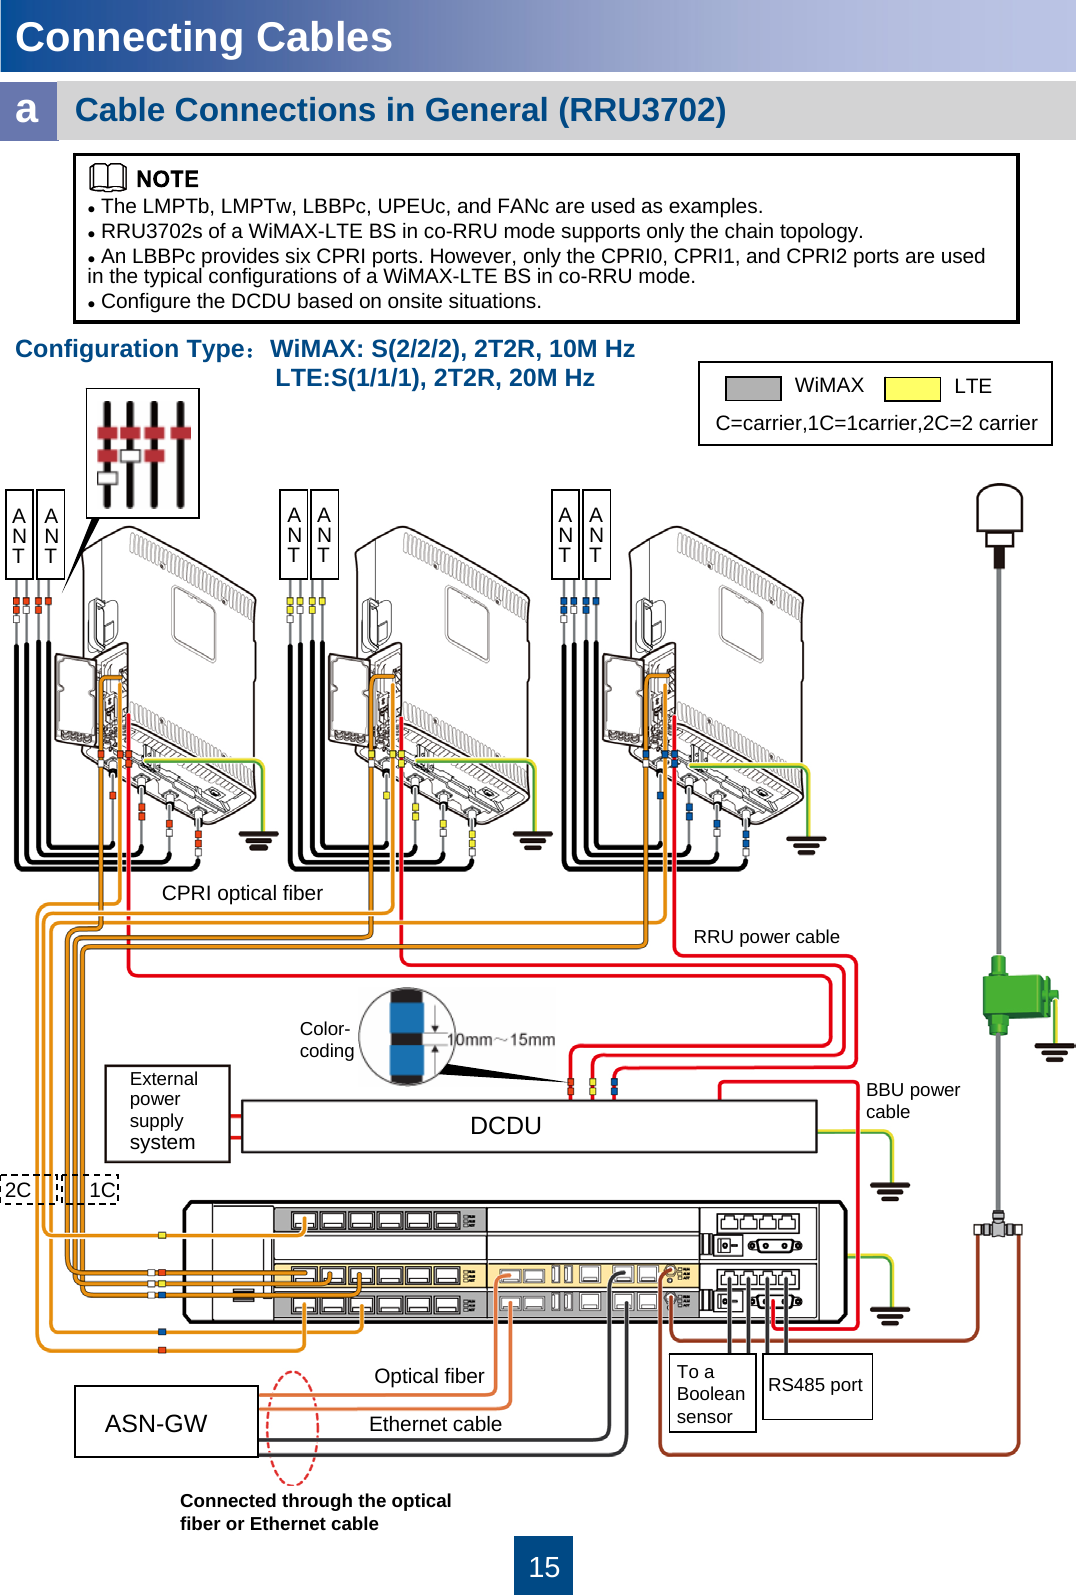 15Connecting CablesaCable Connections in General (RRU3702)RS485 portExternal power supplysystemOptical fiberEthernet cableTo a Boolean sensorConnected through the optical fiber or Ethernet cableRRU power cableCPRI optical fiberBBU power cablezThe LMPTb, LMPTw, LBBPc, UPEUc, and FANc are used as examples.zRRU3702s of a WiMAX-LTE BS in co-RRU mode supports only the chain topology. zAn LBBPc provides six CPRI ports. However, only the CPRI0, CPRI1, and CPRI2 ports are used in the typical configurations of a WiMAX-LTE BS in co-RRU mode.zConfigure the DCDU based on onsite situations.DCDUConfiguration Type：WiMAX: S(2/2/2), 2T2R, 10M HzLTE:S(1/1/1), 2T2R, 20M Hz WiMAX LTE2C 1CC=carrier,1C=1carrier,2C=2 carrierANTANTANTANTANTANTColor-codingASN-GW